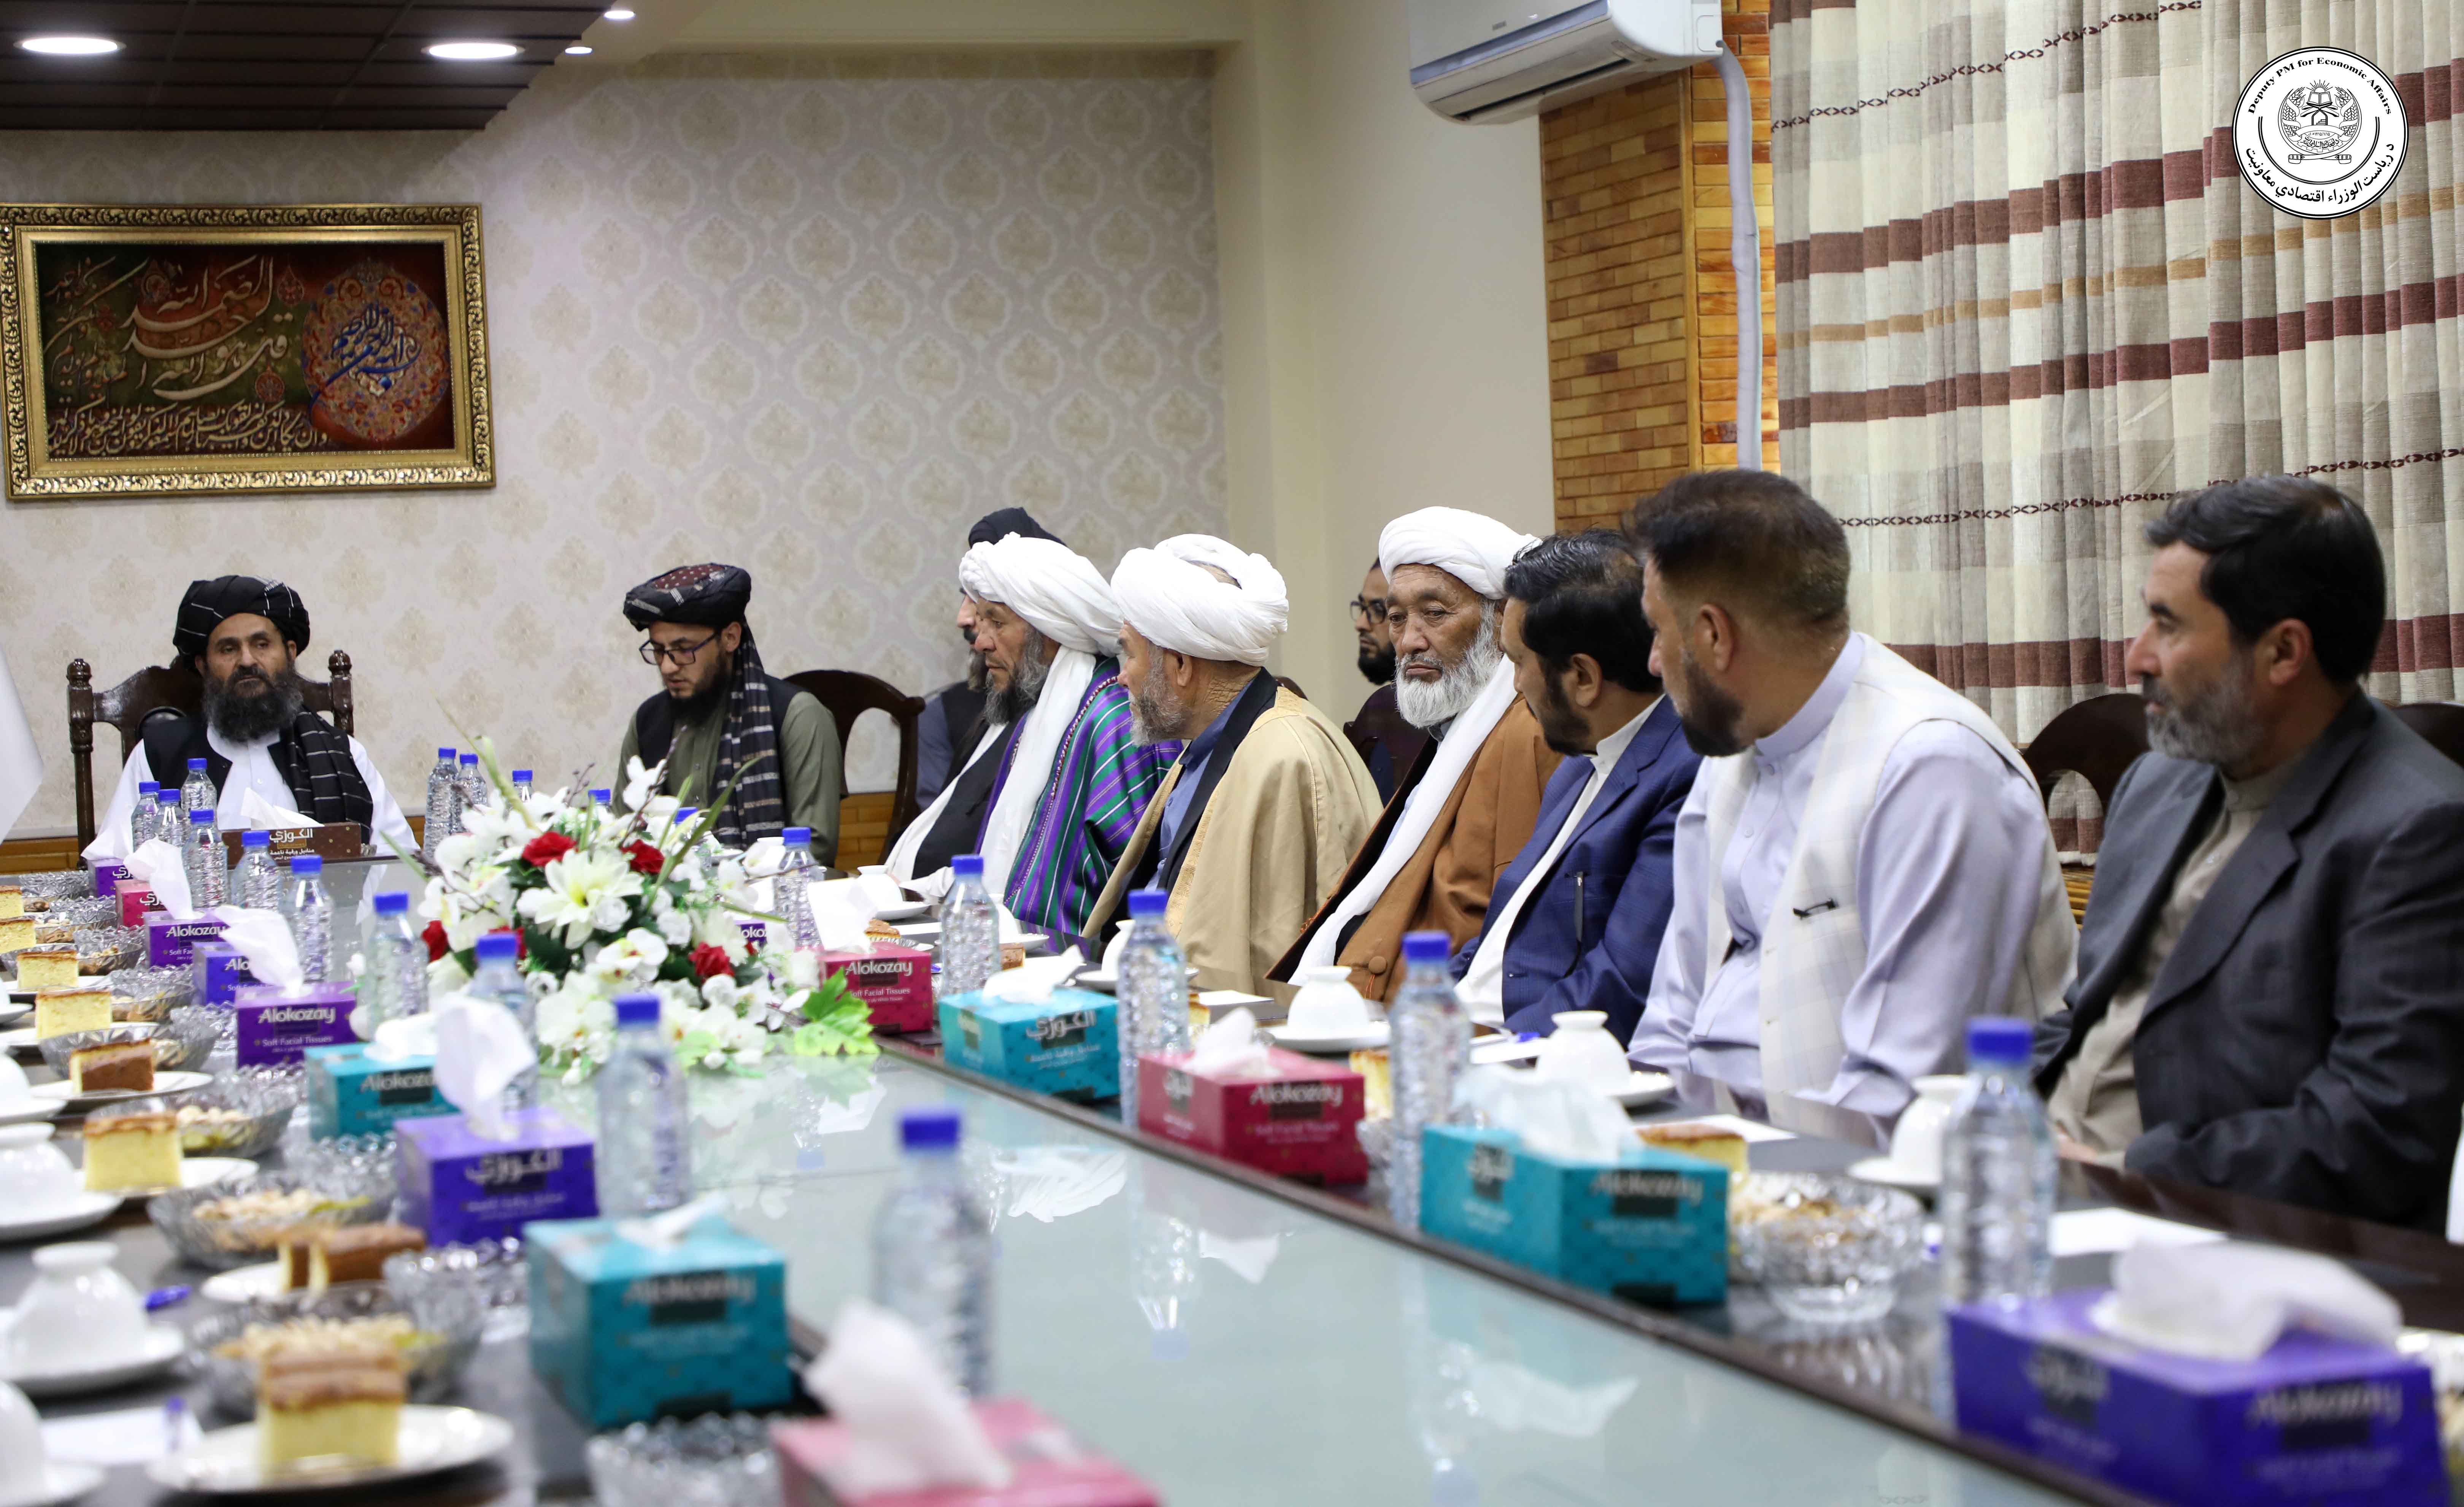 Meeting with Shia scholars and elders